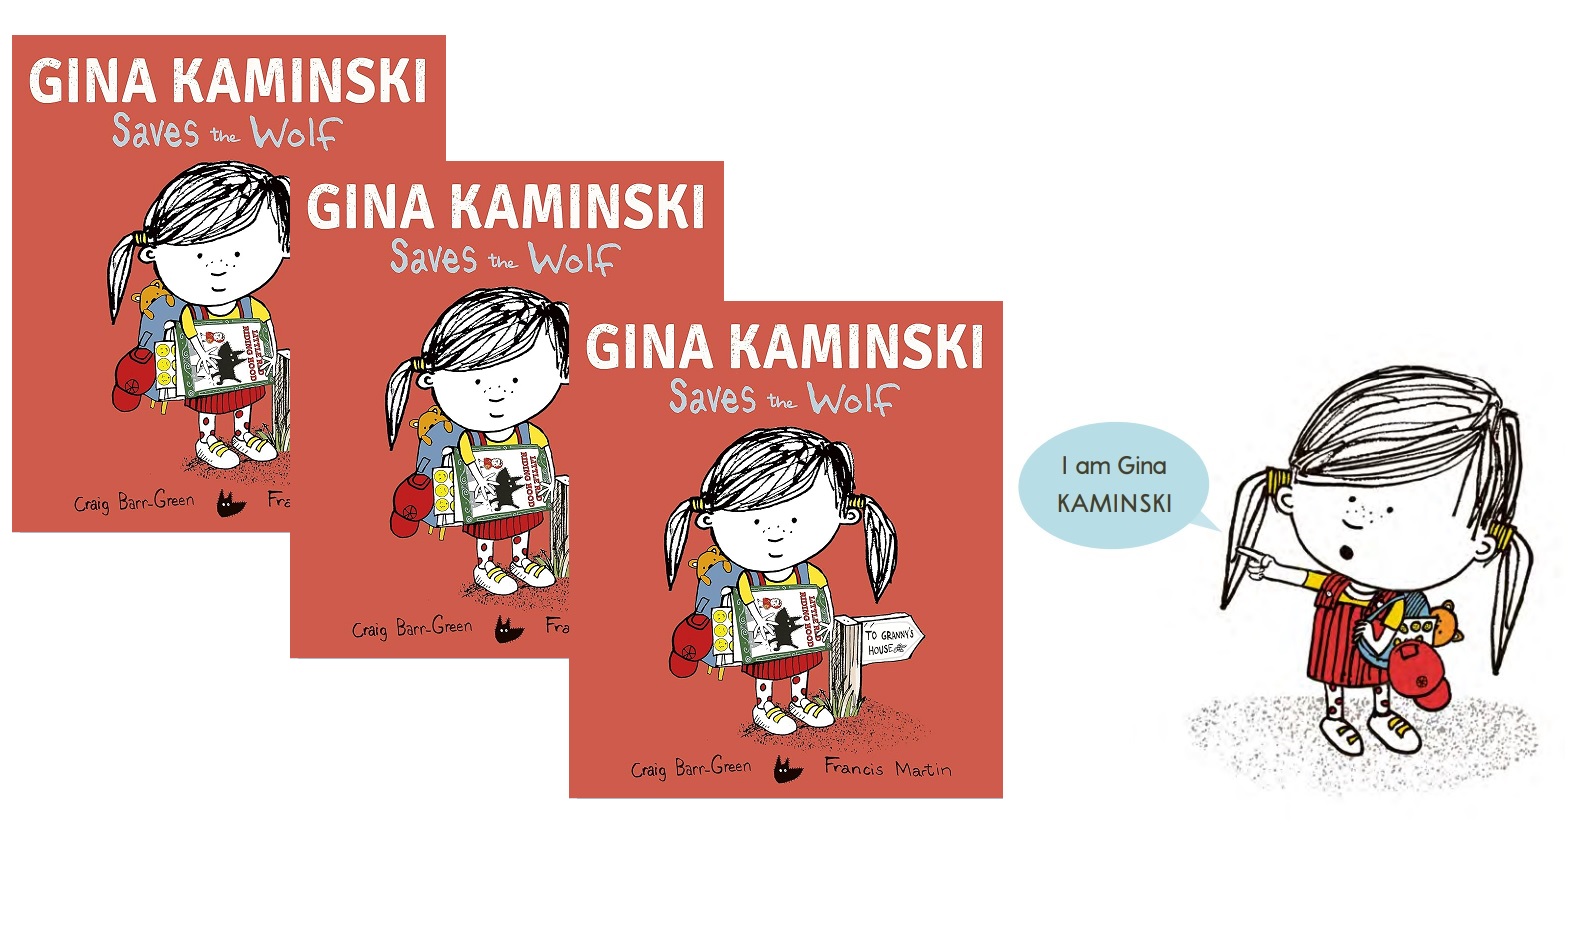 Meet Gina Kaminski - and win a copy of her new adventure!